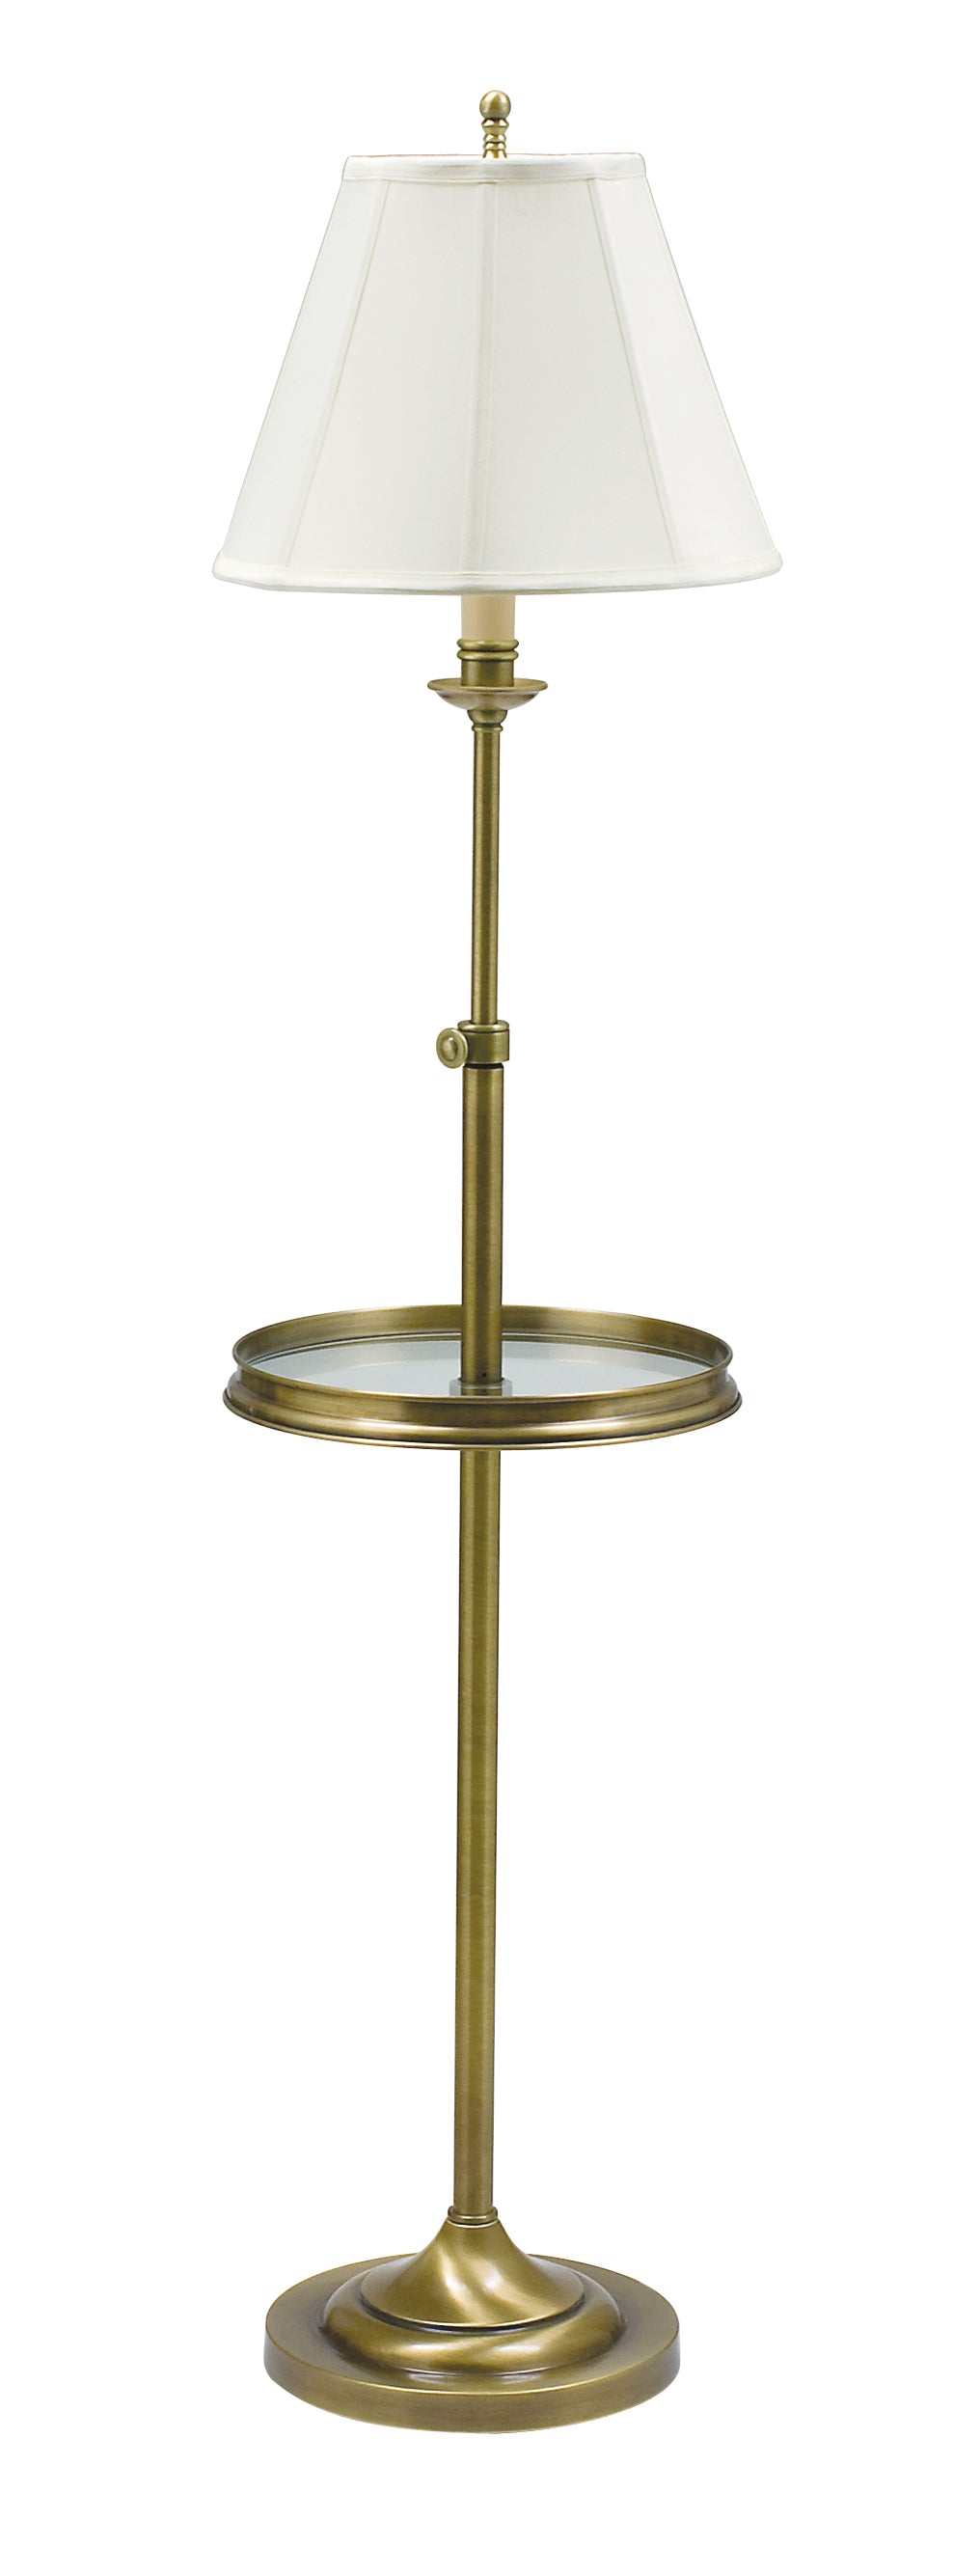 House of Troy Club Adjustable Antique Brass Floor Lamp Glass Table CL202-AB